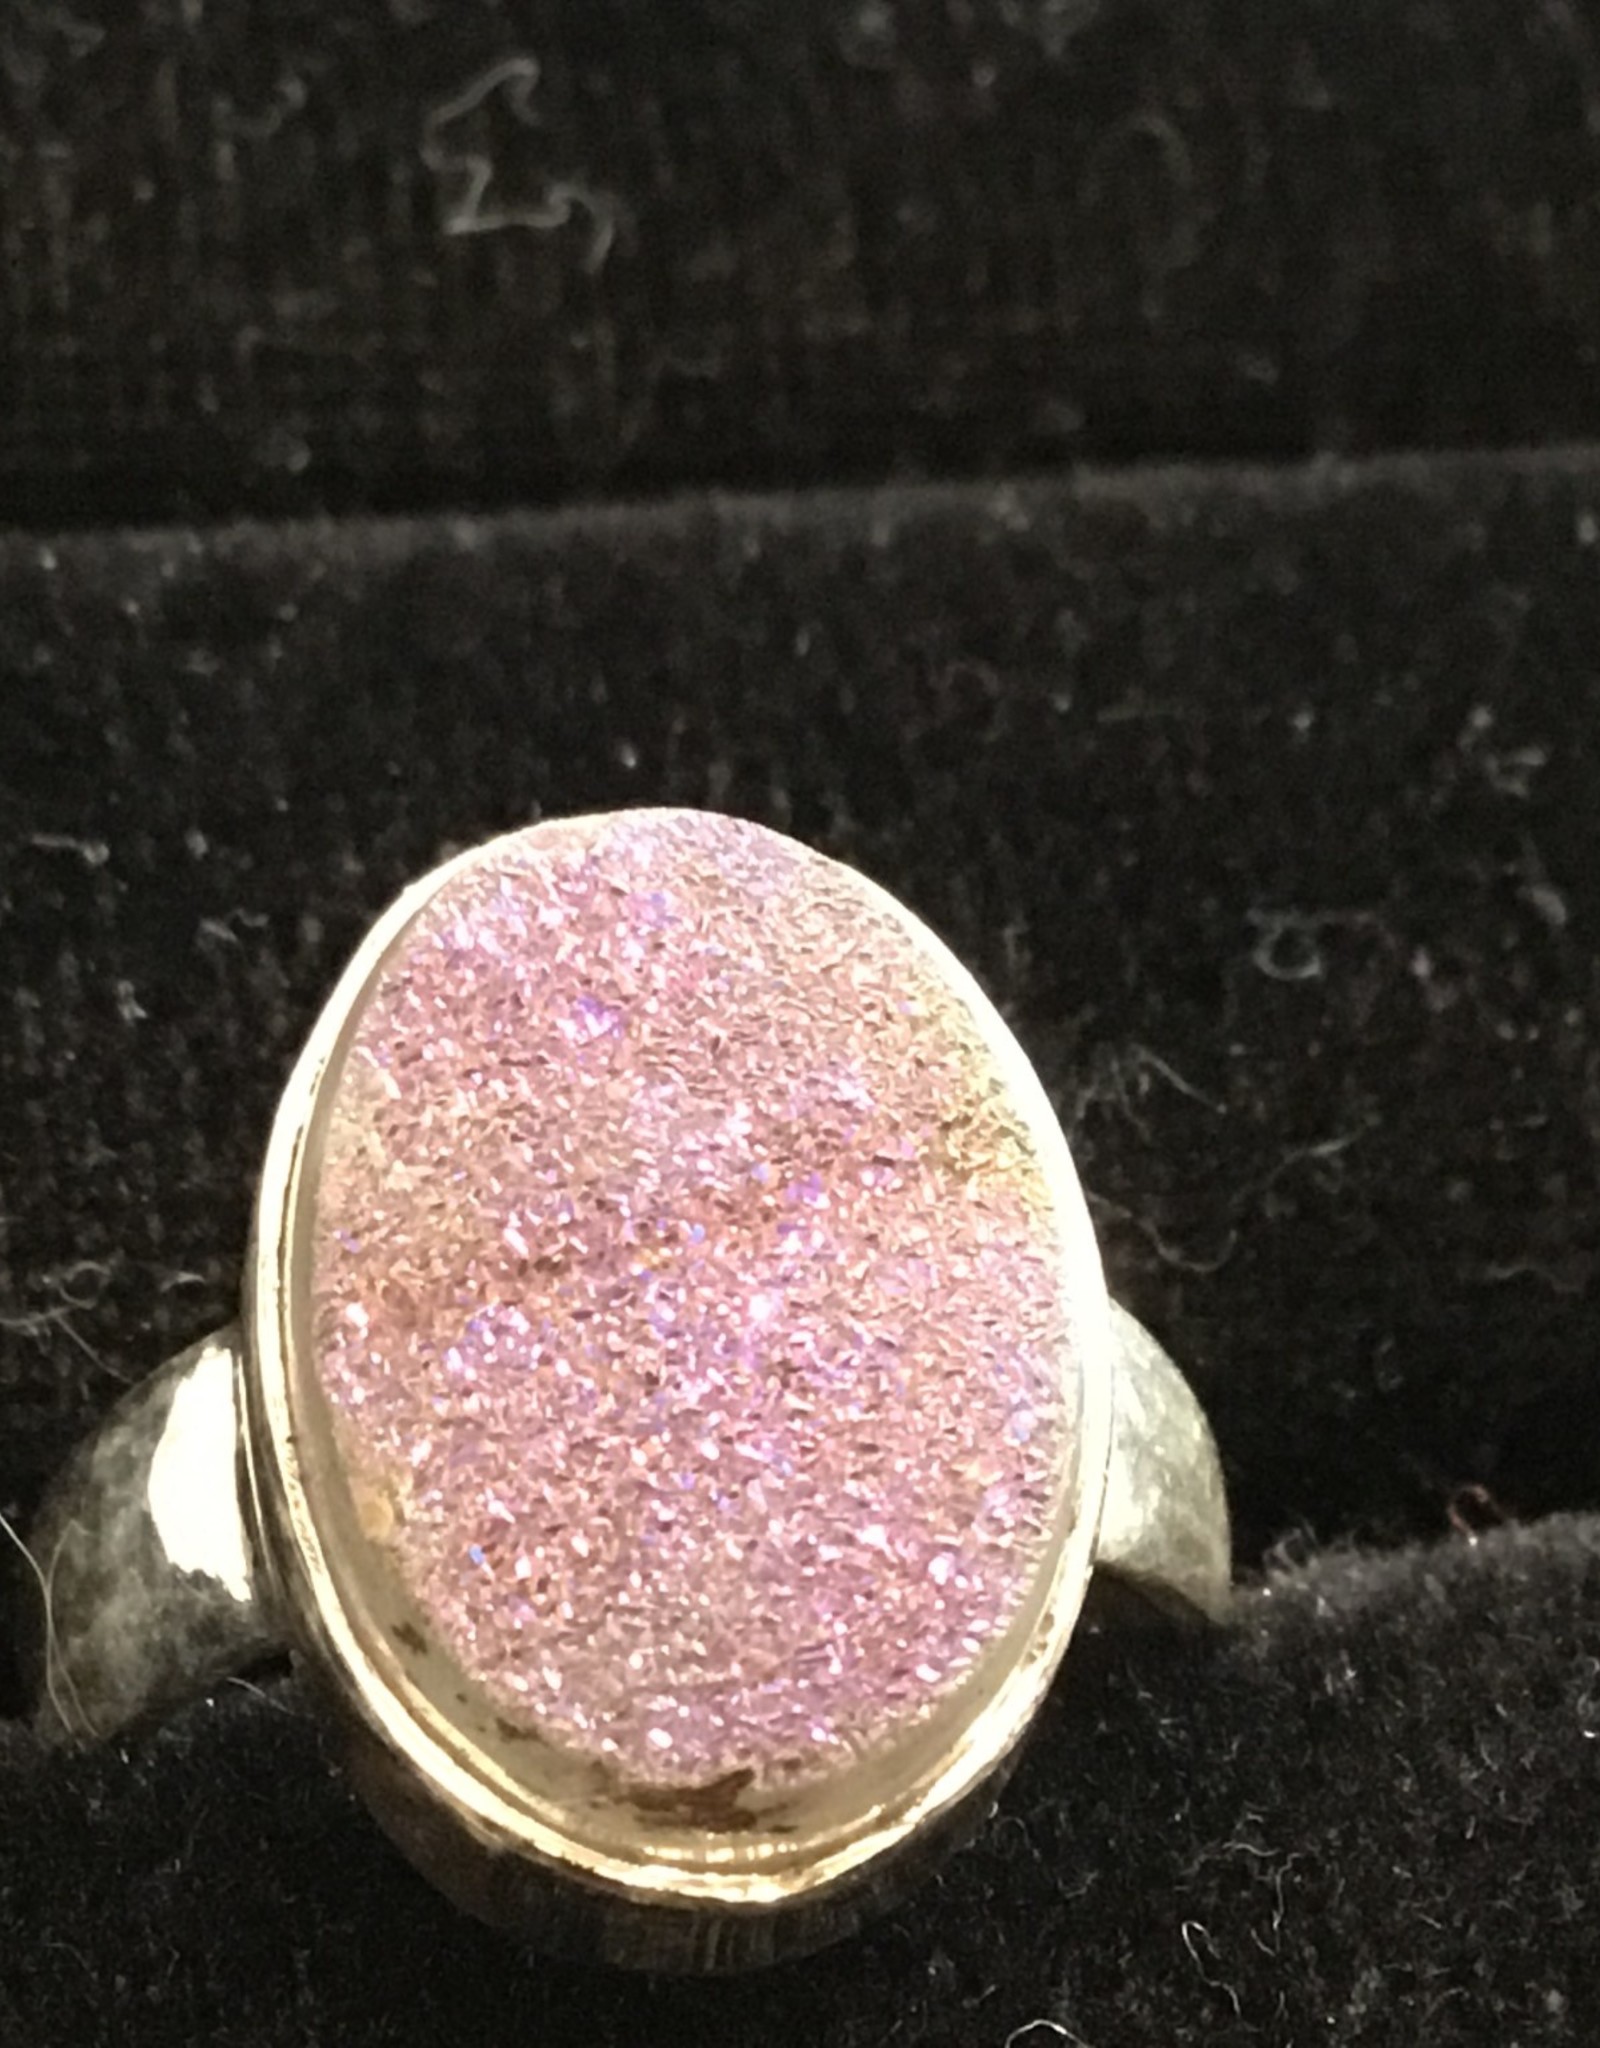 Coloured Druzy Silver Ring